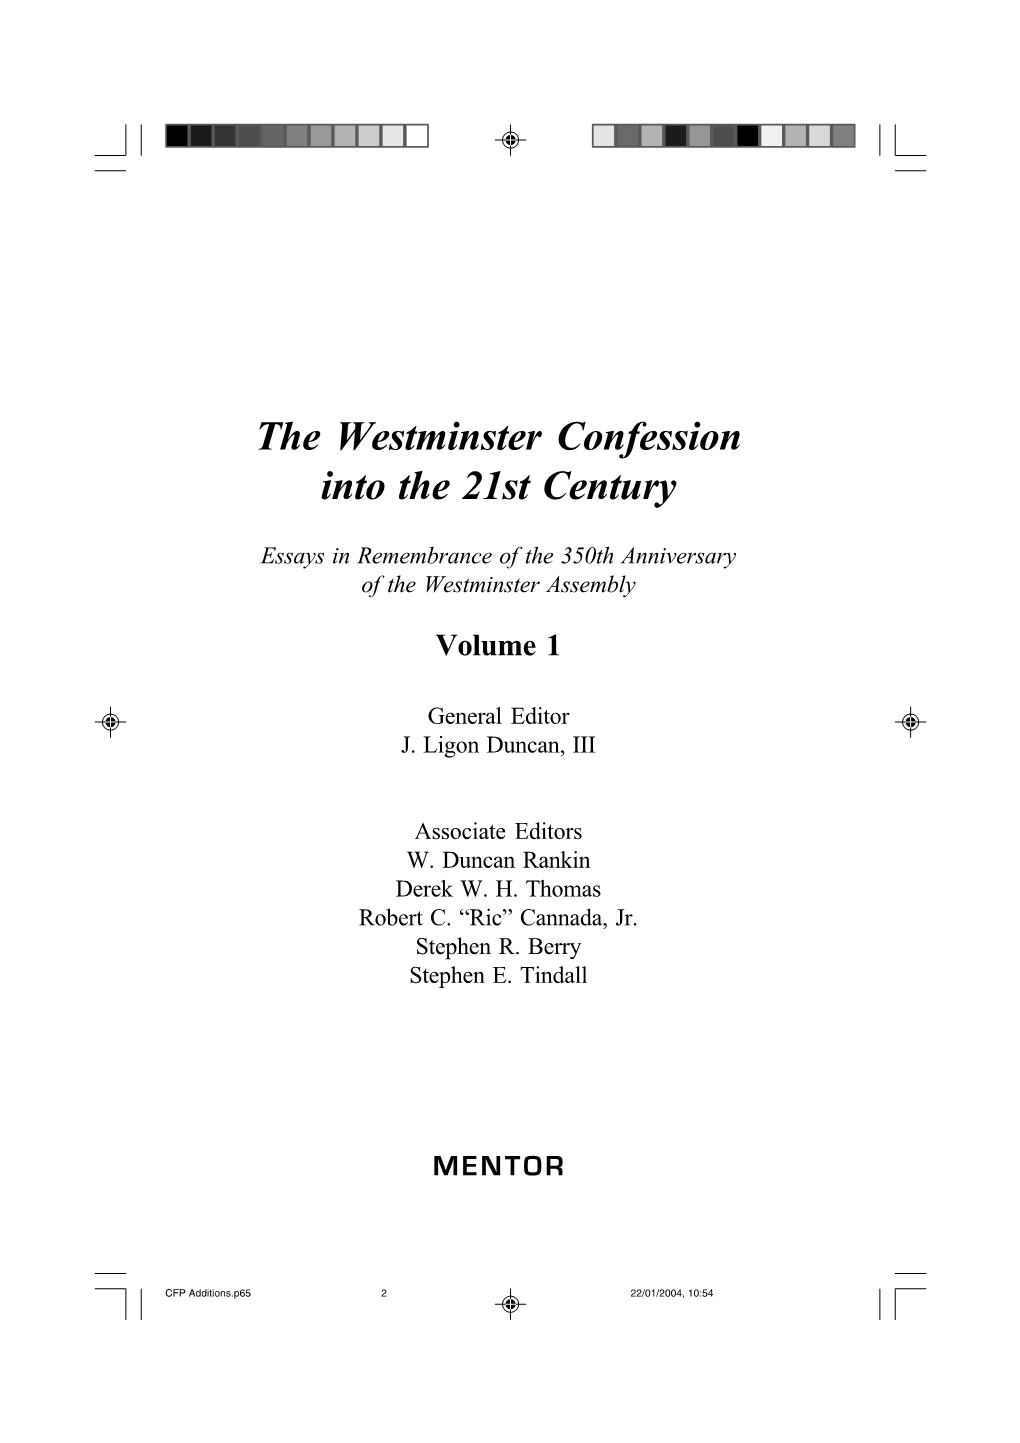 The Westminster Confession Into the 21St Century